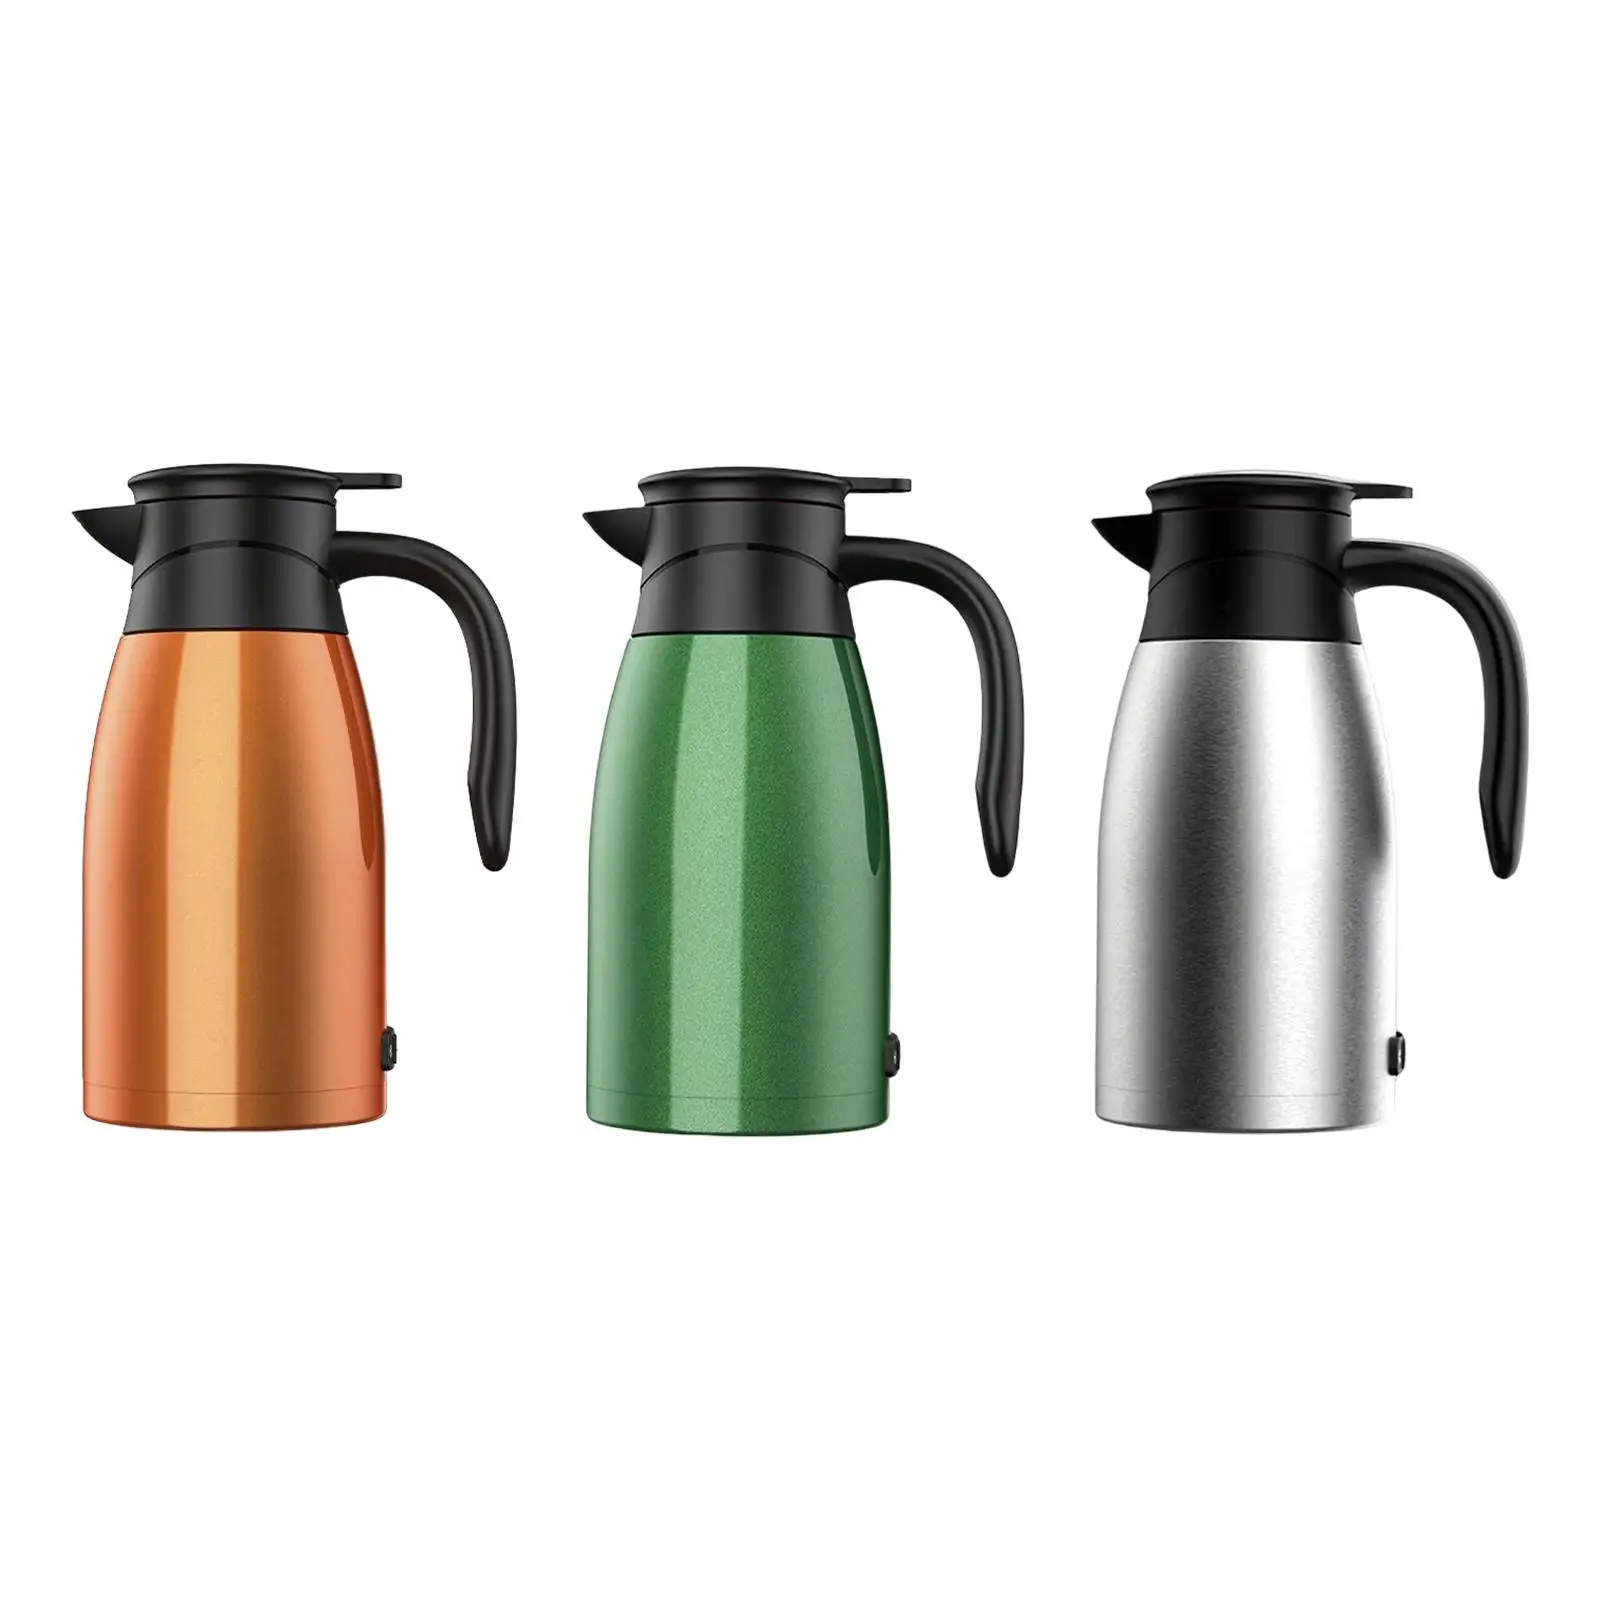 12V Car Kettle Boiler Temp Display 1400ml Heating Cup Heated Water Boiler Hot Water Kettle for Outdoor Camping Travel